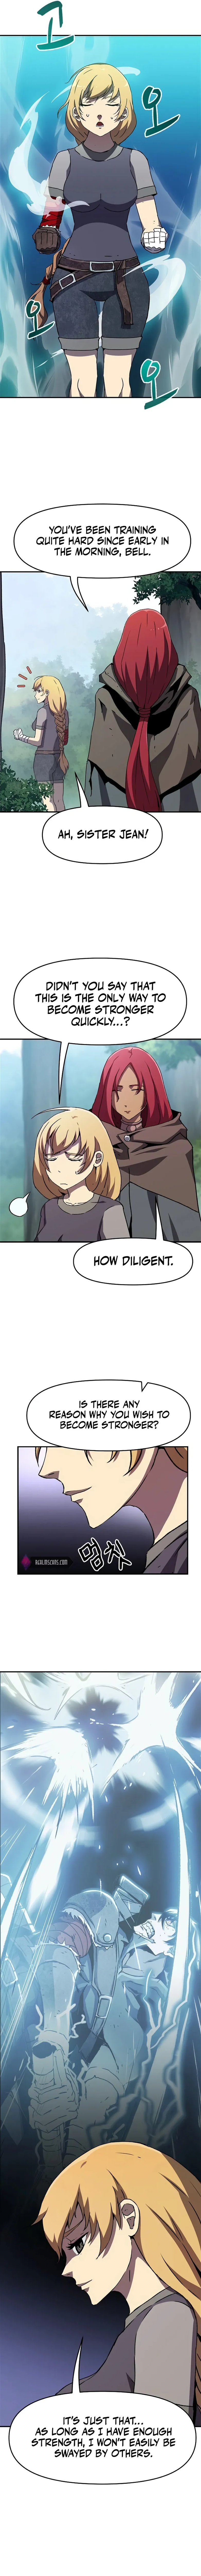 I BECAME A TERMINALLY-ILL KNIGHT Chapter 13 page 10